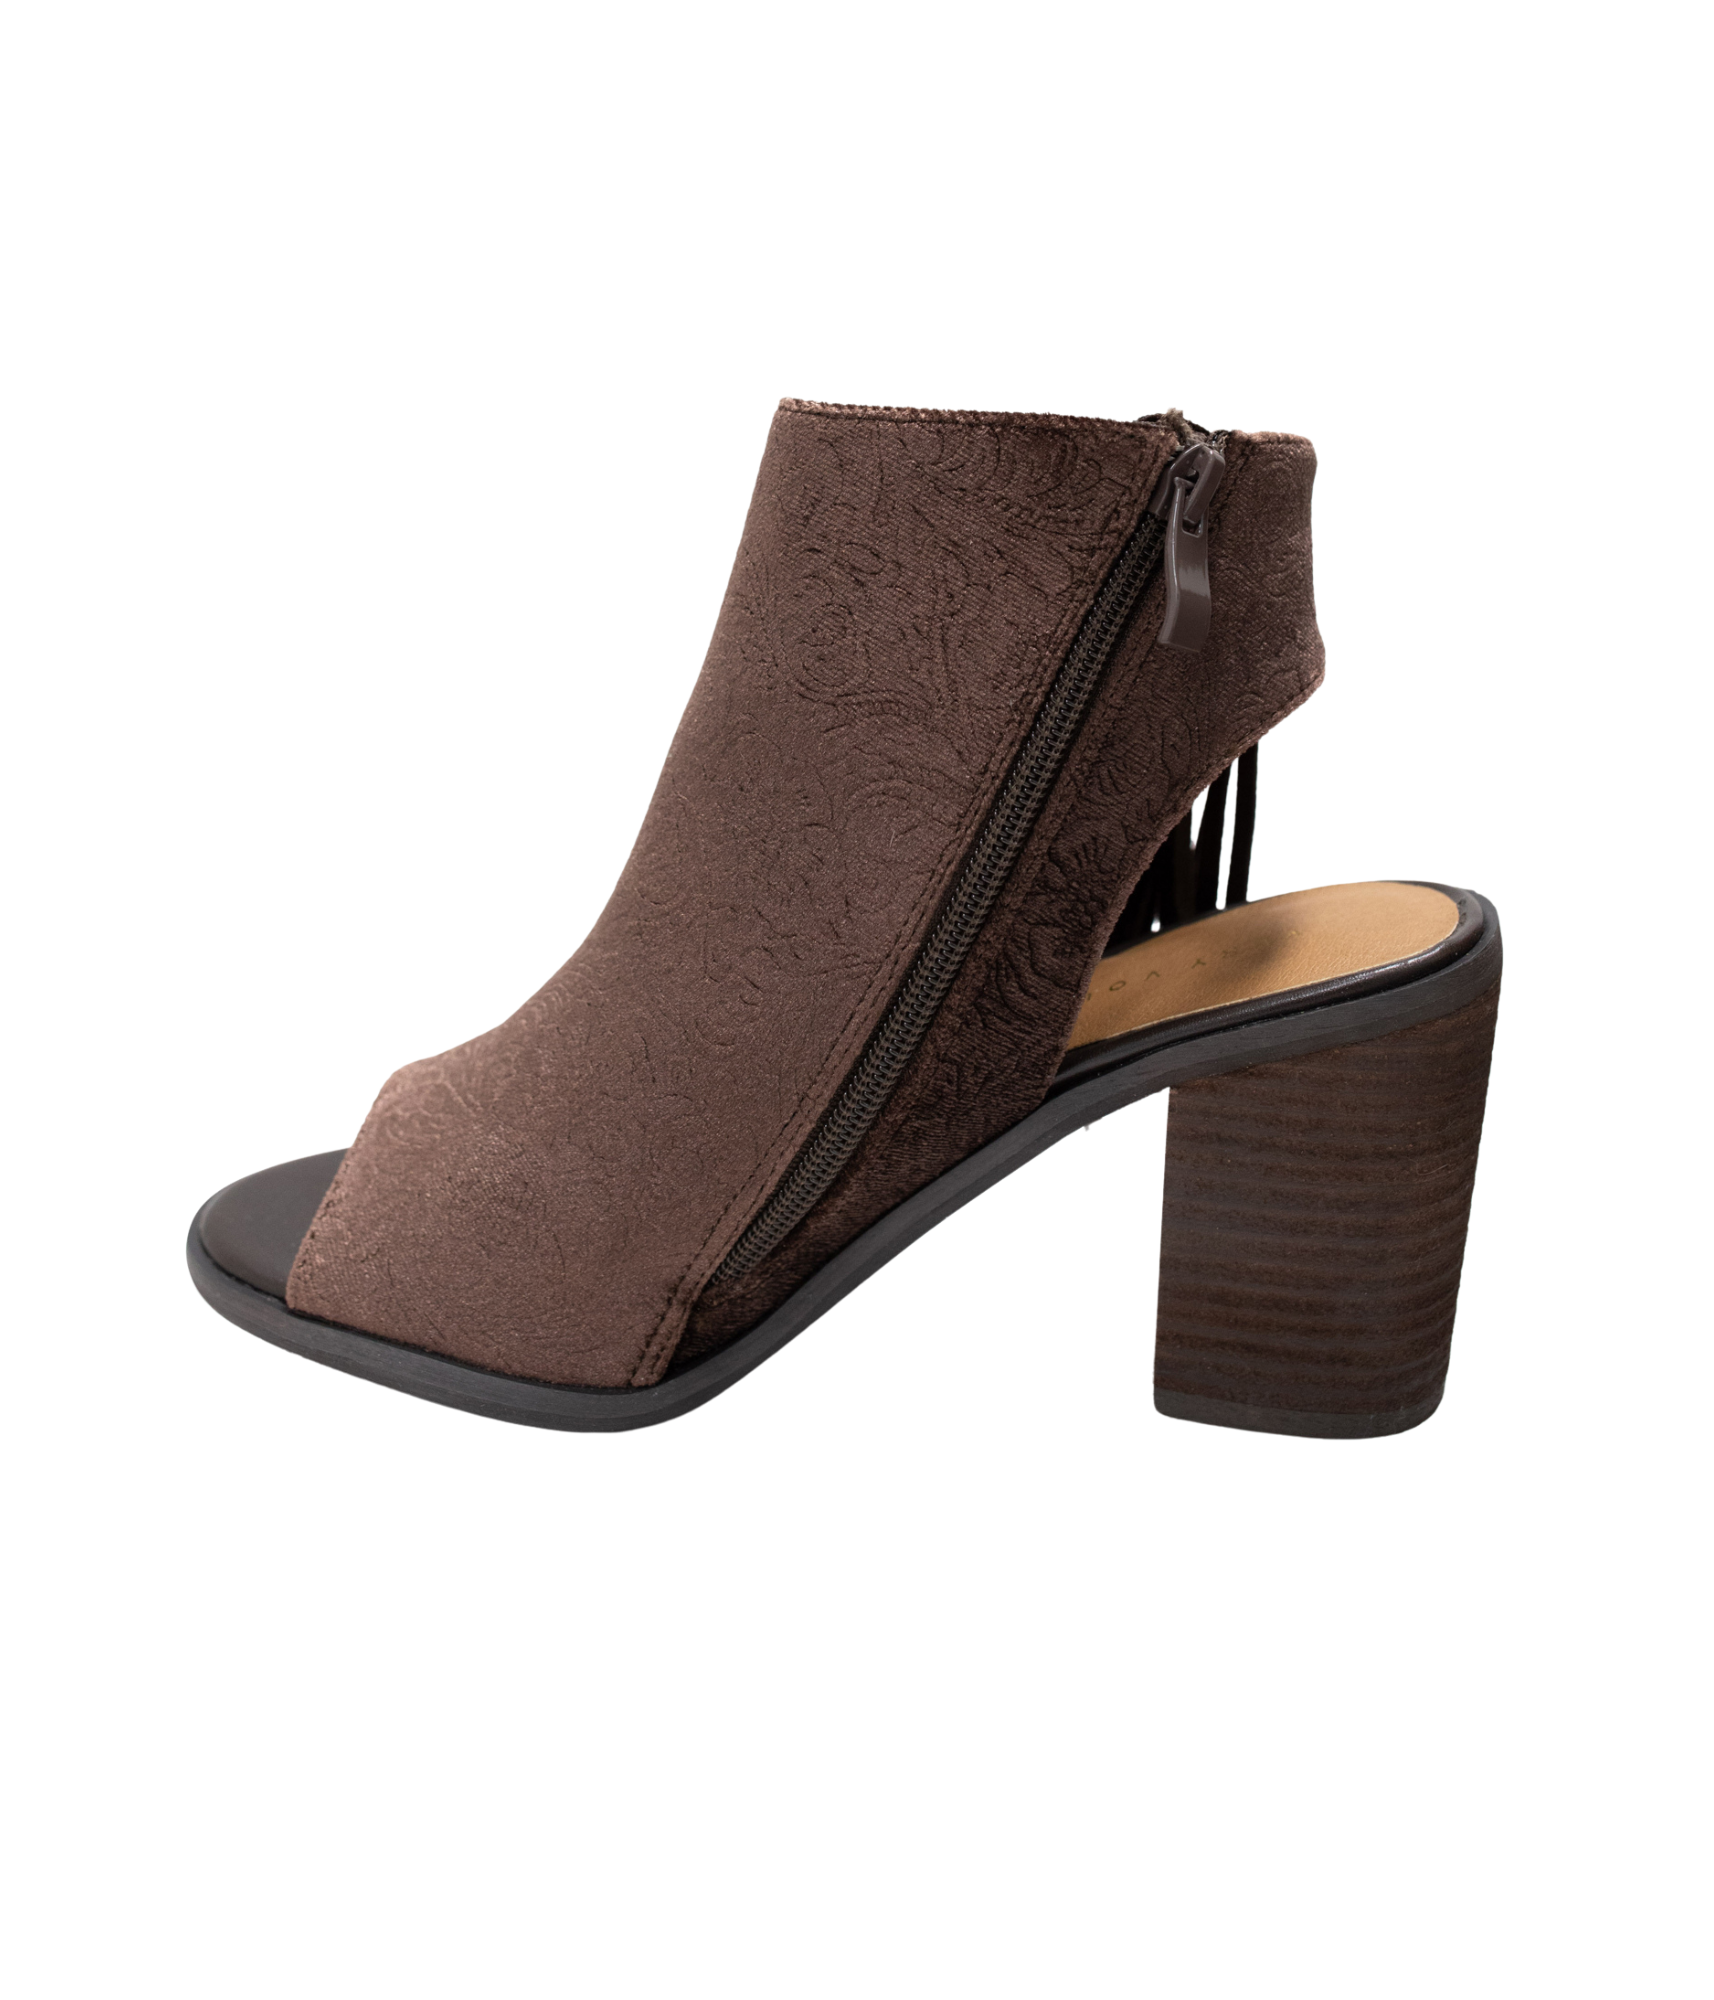 Pony Express Fringe Open Toed Ankle Boot in Brown